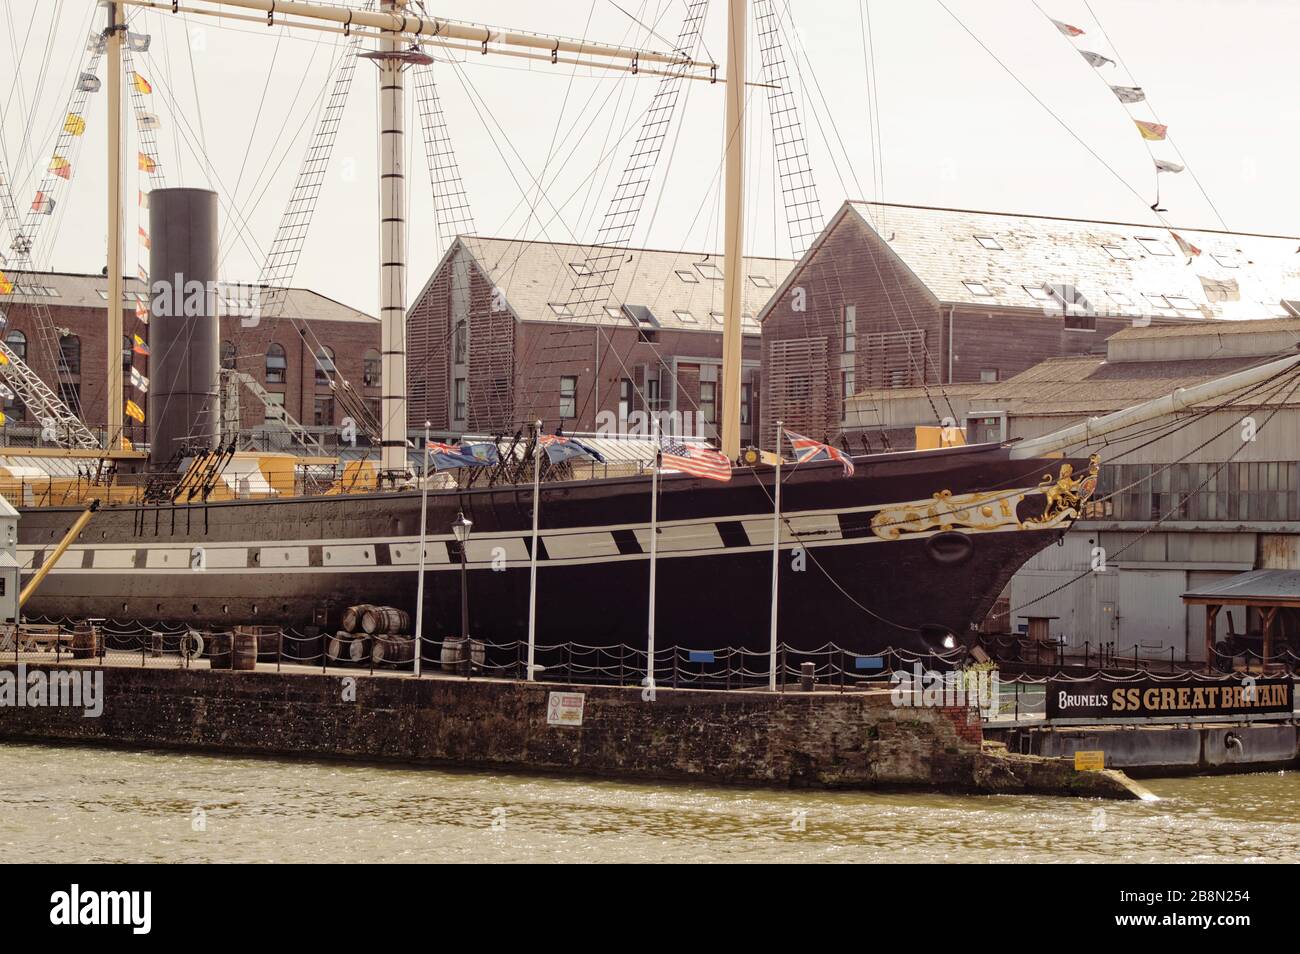 The SS Great Britain in dry dock as a museum ship in Bristol.  Isambard Kingdom Brunel's design of an iron passenger steamship in the mid 1800s. Stock Photo